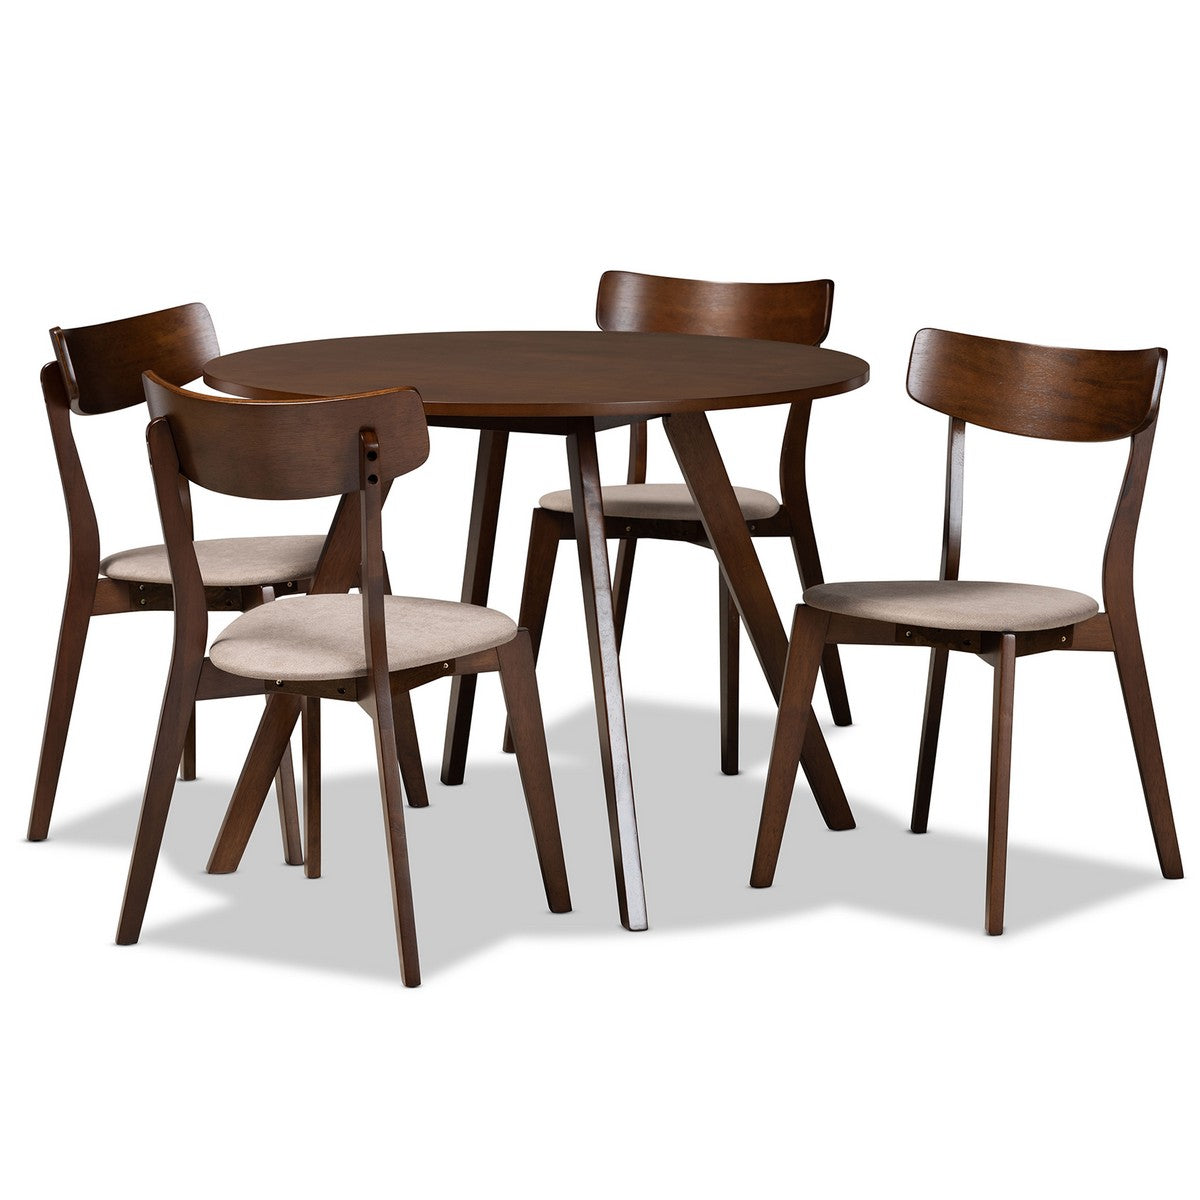 Baxton Studio Rika Mid-Century Modern Transitional Light Beige Fabric Upholstered and Walnut Brown Finished Wood 5-Piece Dining Set Baxton Studio-Dining Sets-Minimal And Modern - 1